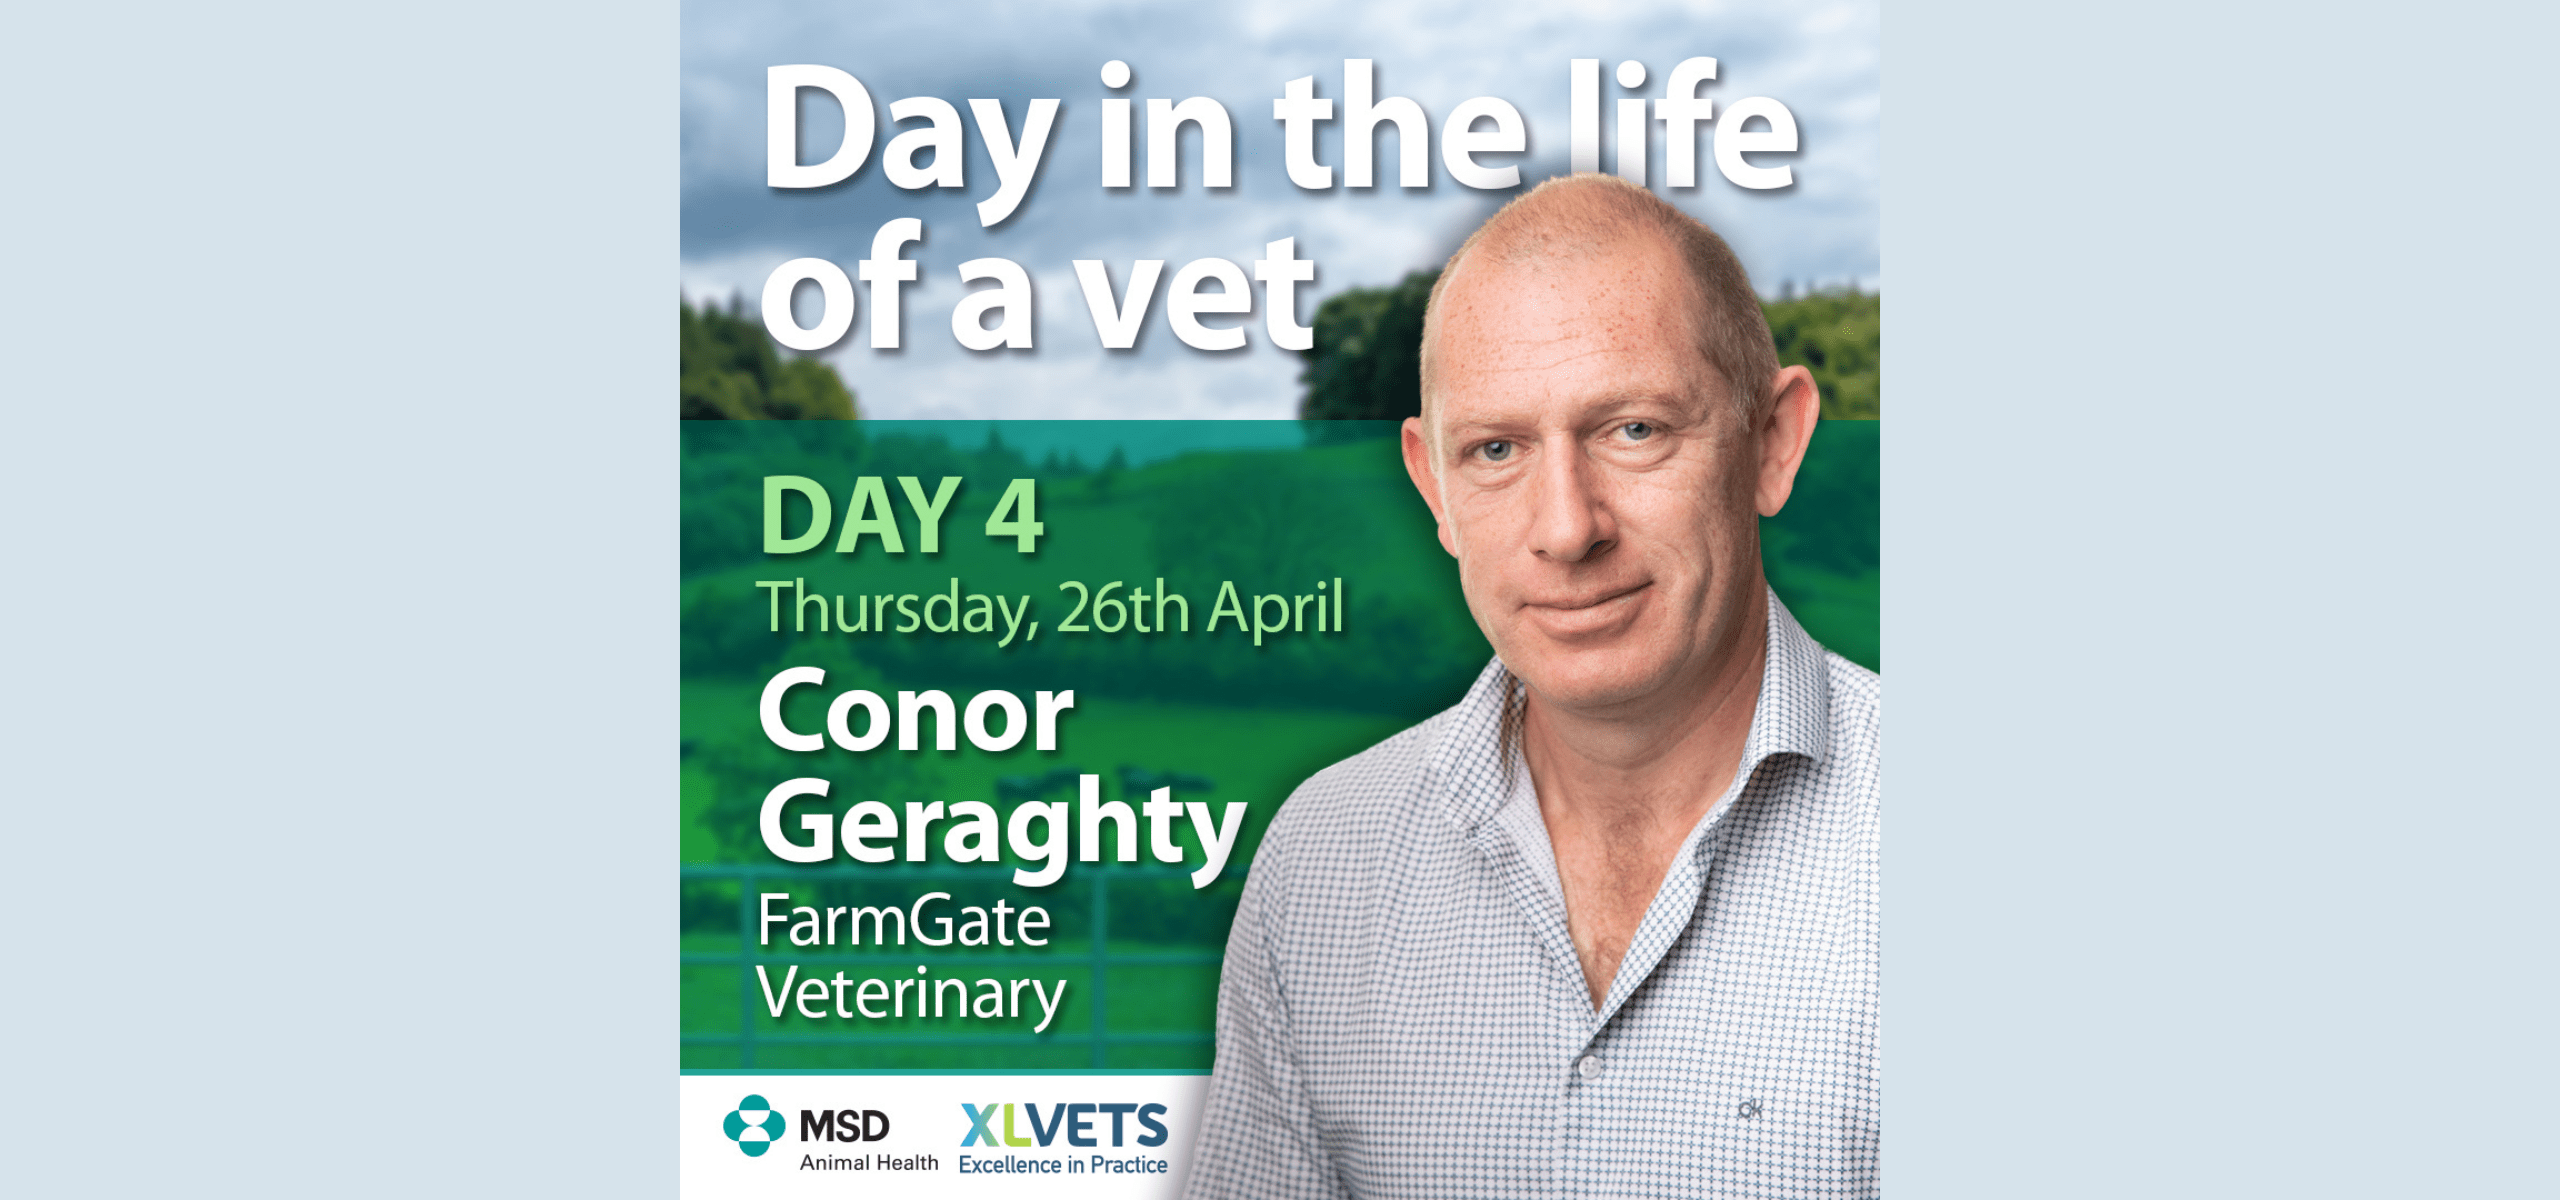 Day in the life: Treating cows and helping horses with Conor Geraghty, FarmGate Veterinary Group